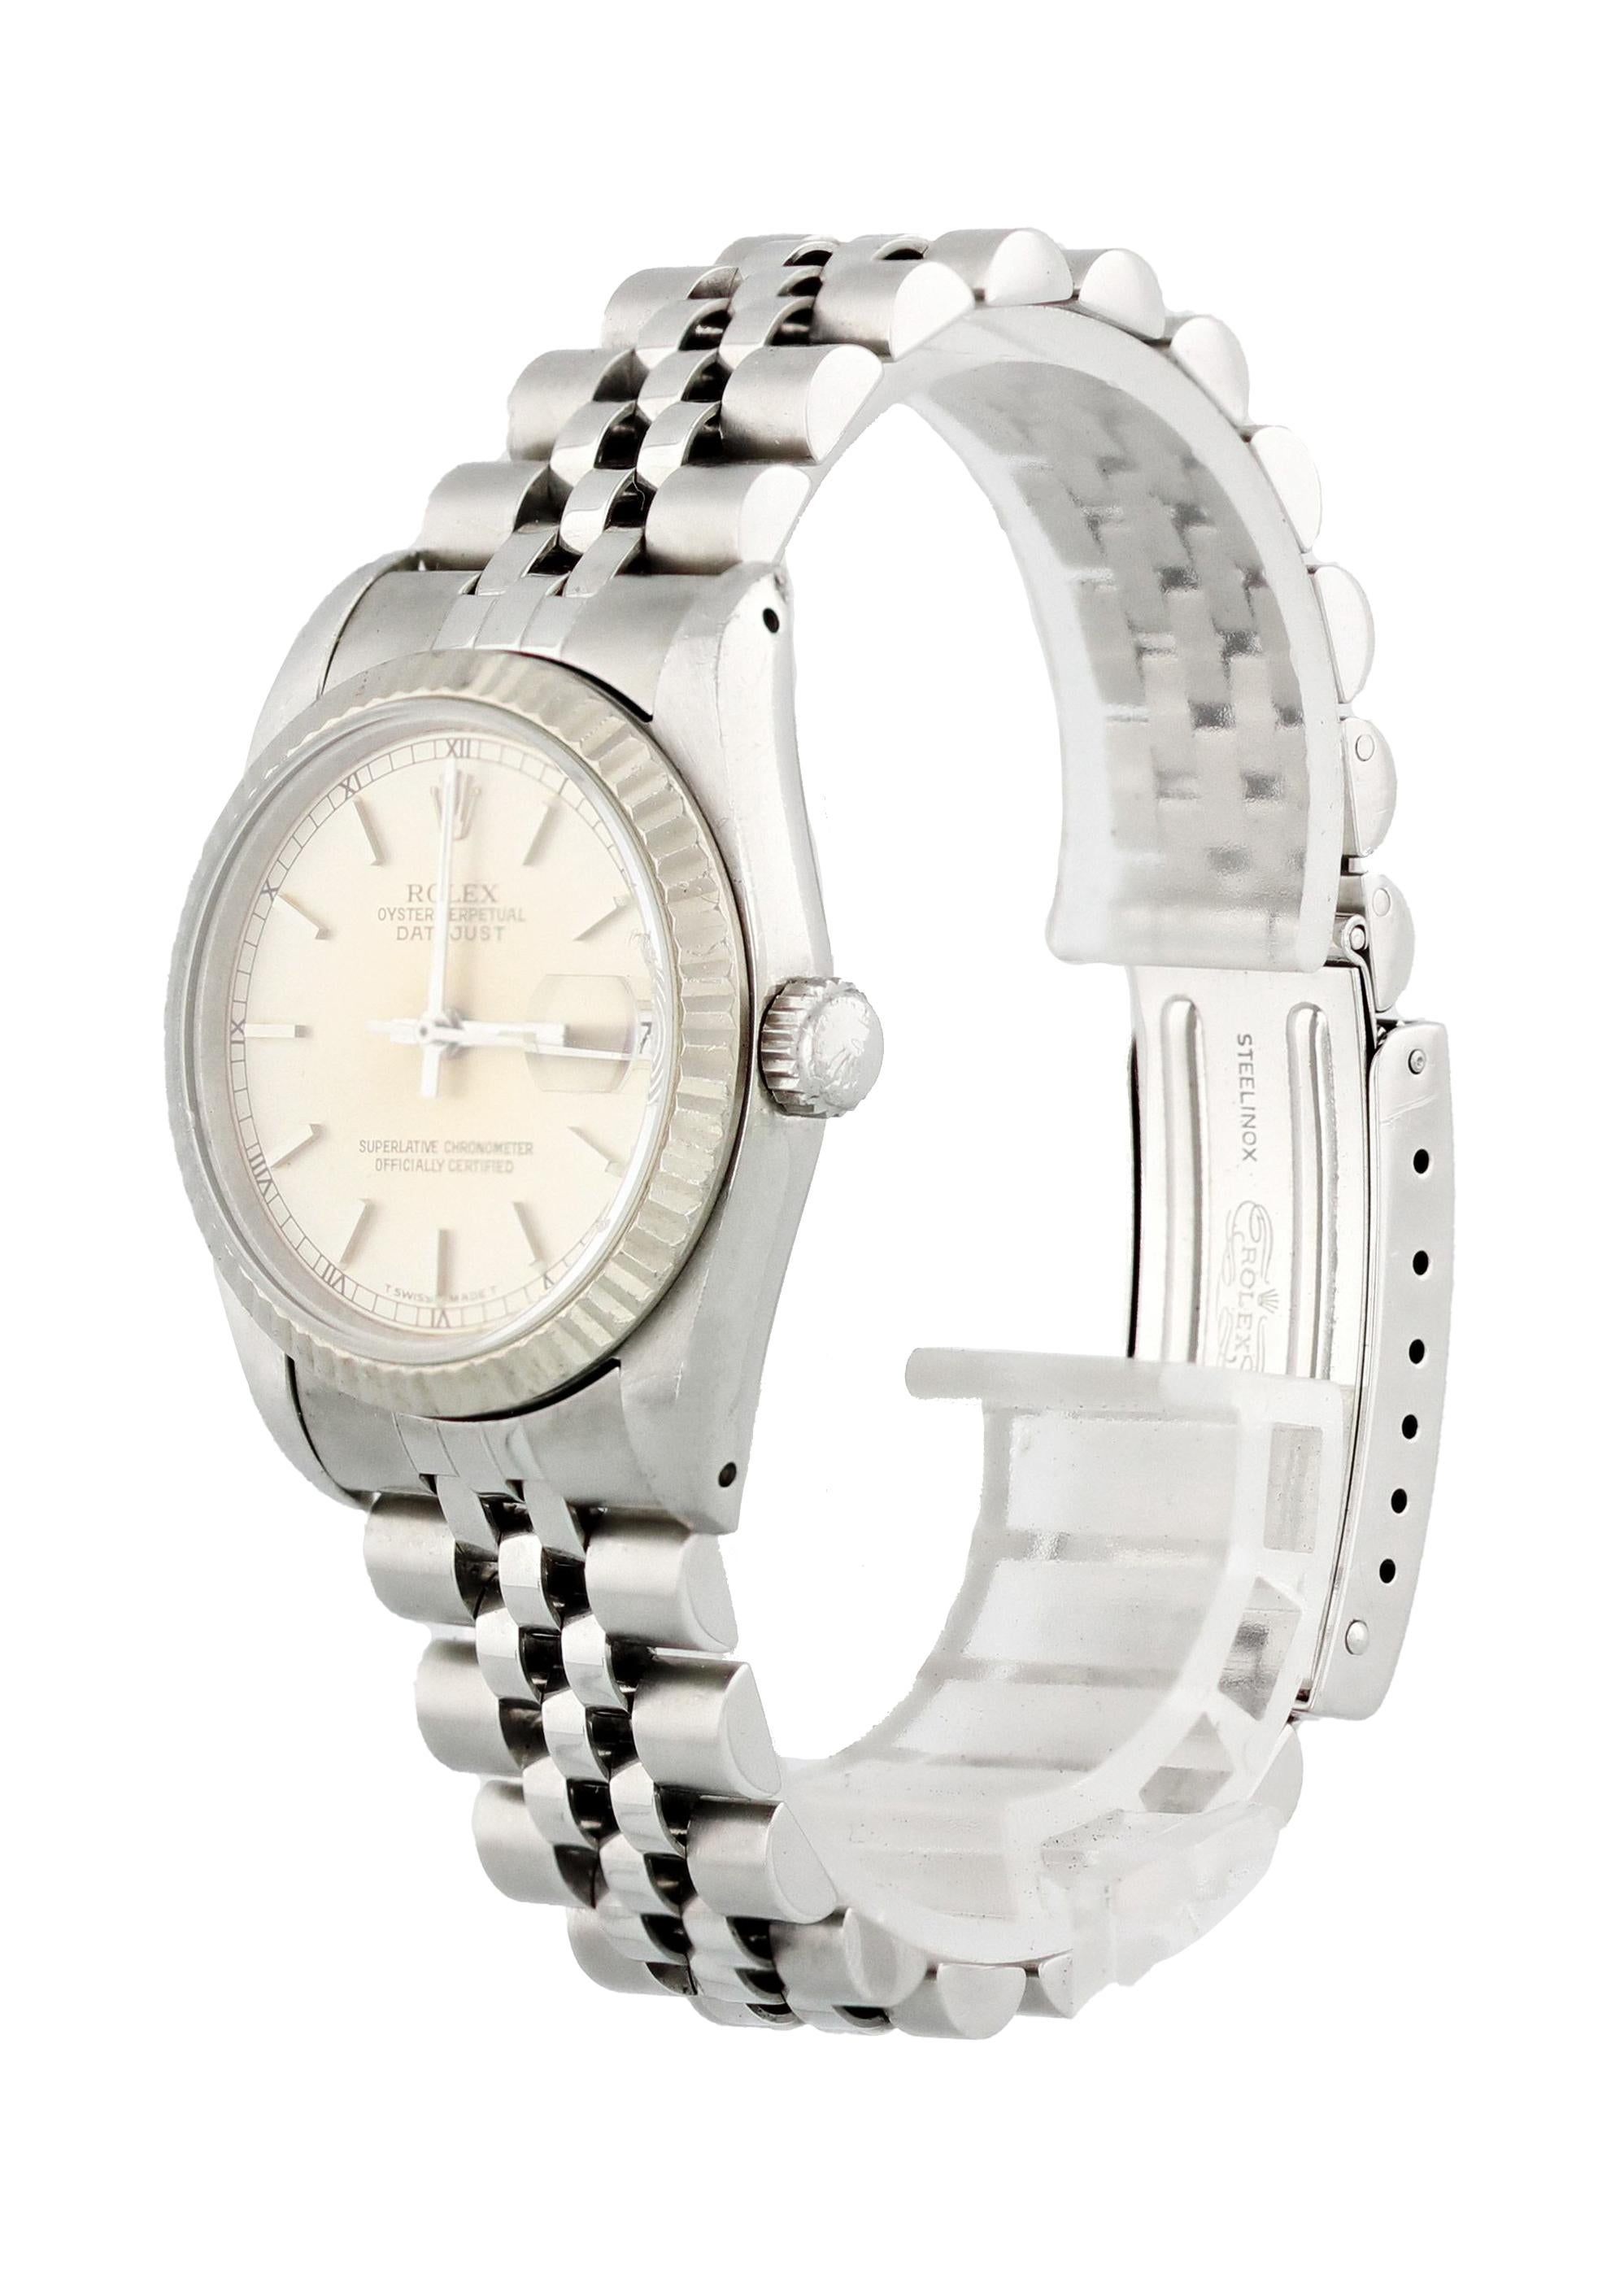 Rolex Datejust 68274 Ladies Watch. 31mm Stainless Steel case. Yellow Gold Stationary bezel. Silver dial with Steel hands and index hour markers. Minute markers on the outer dial. Date display at the 3 o'clock position. Stainless Steel Bracelet with